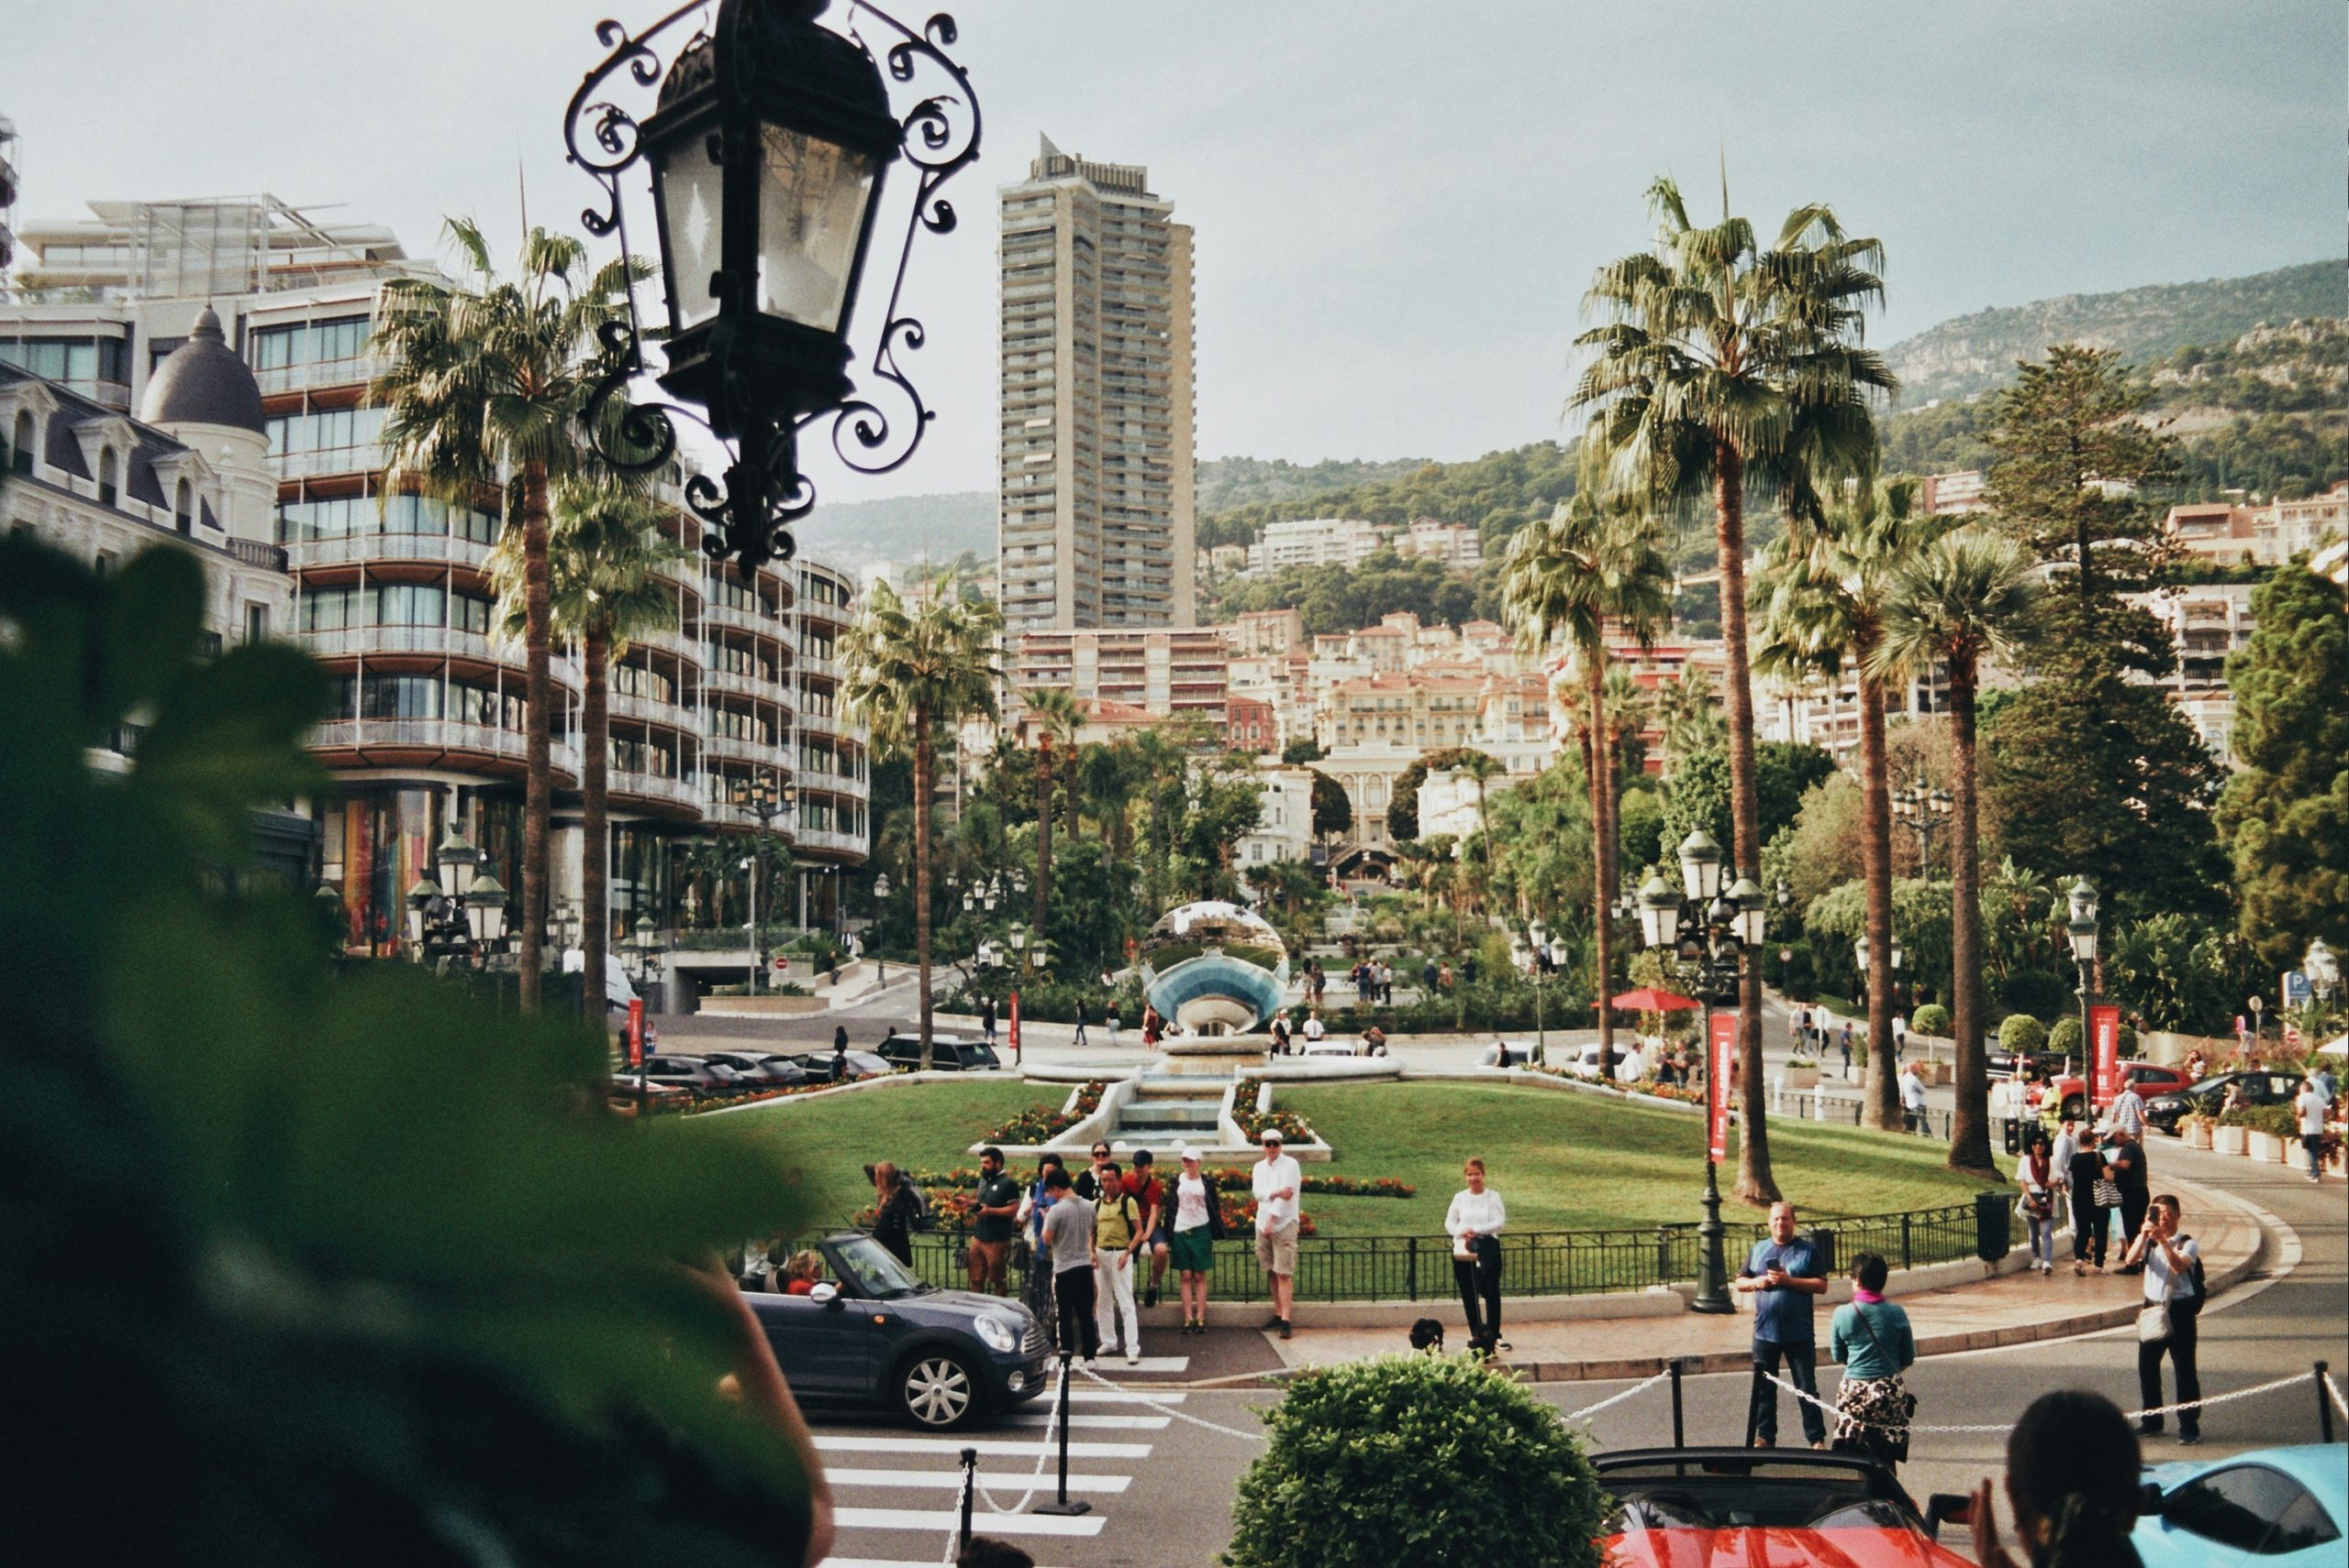 explore the luxury and beauty of monaco, a sovereign city-state renowned for its stunning coastline, glamorous casinos, and prestigious grand prix race.